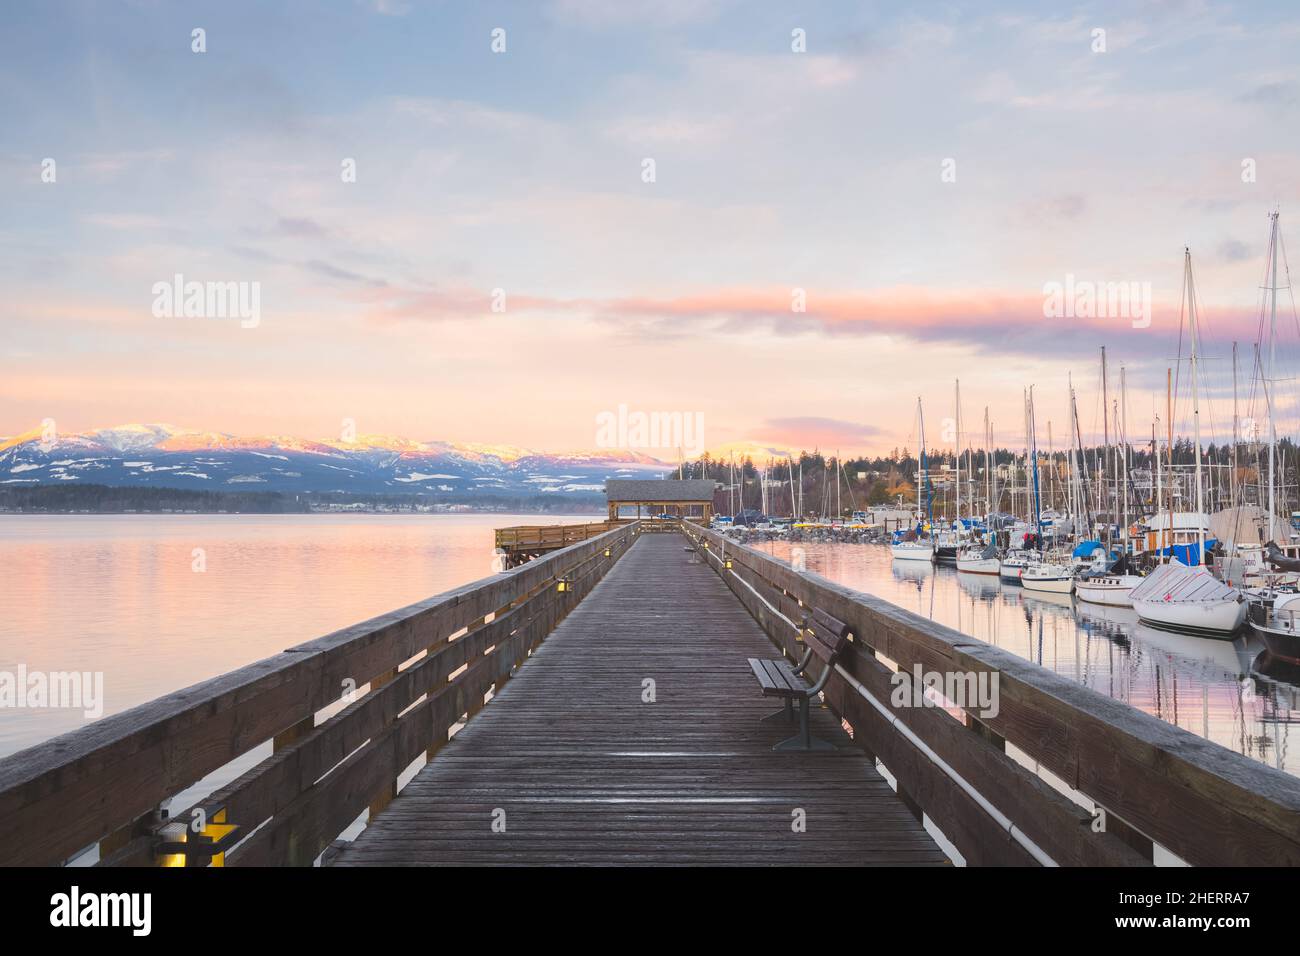 Sunset or sunrise at the waterfront boardwalk and marina on a cold winter day at Comox Harbour, British Columbia, Canada. Stock Photo